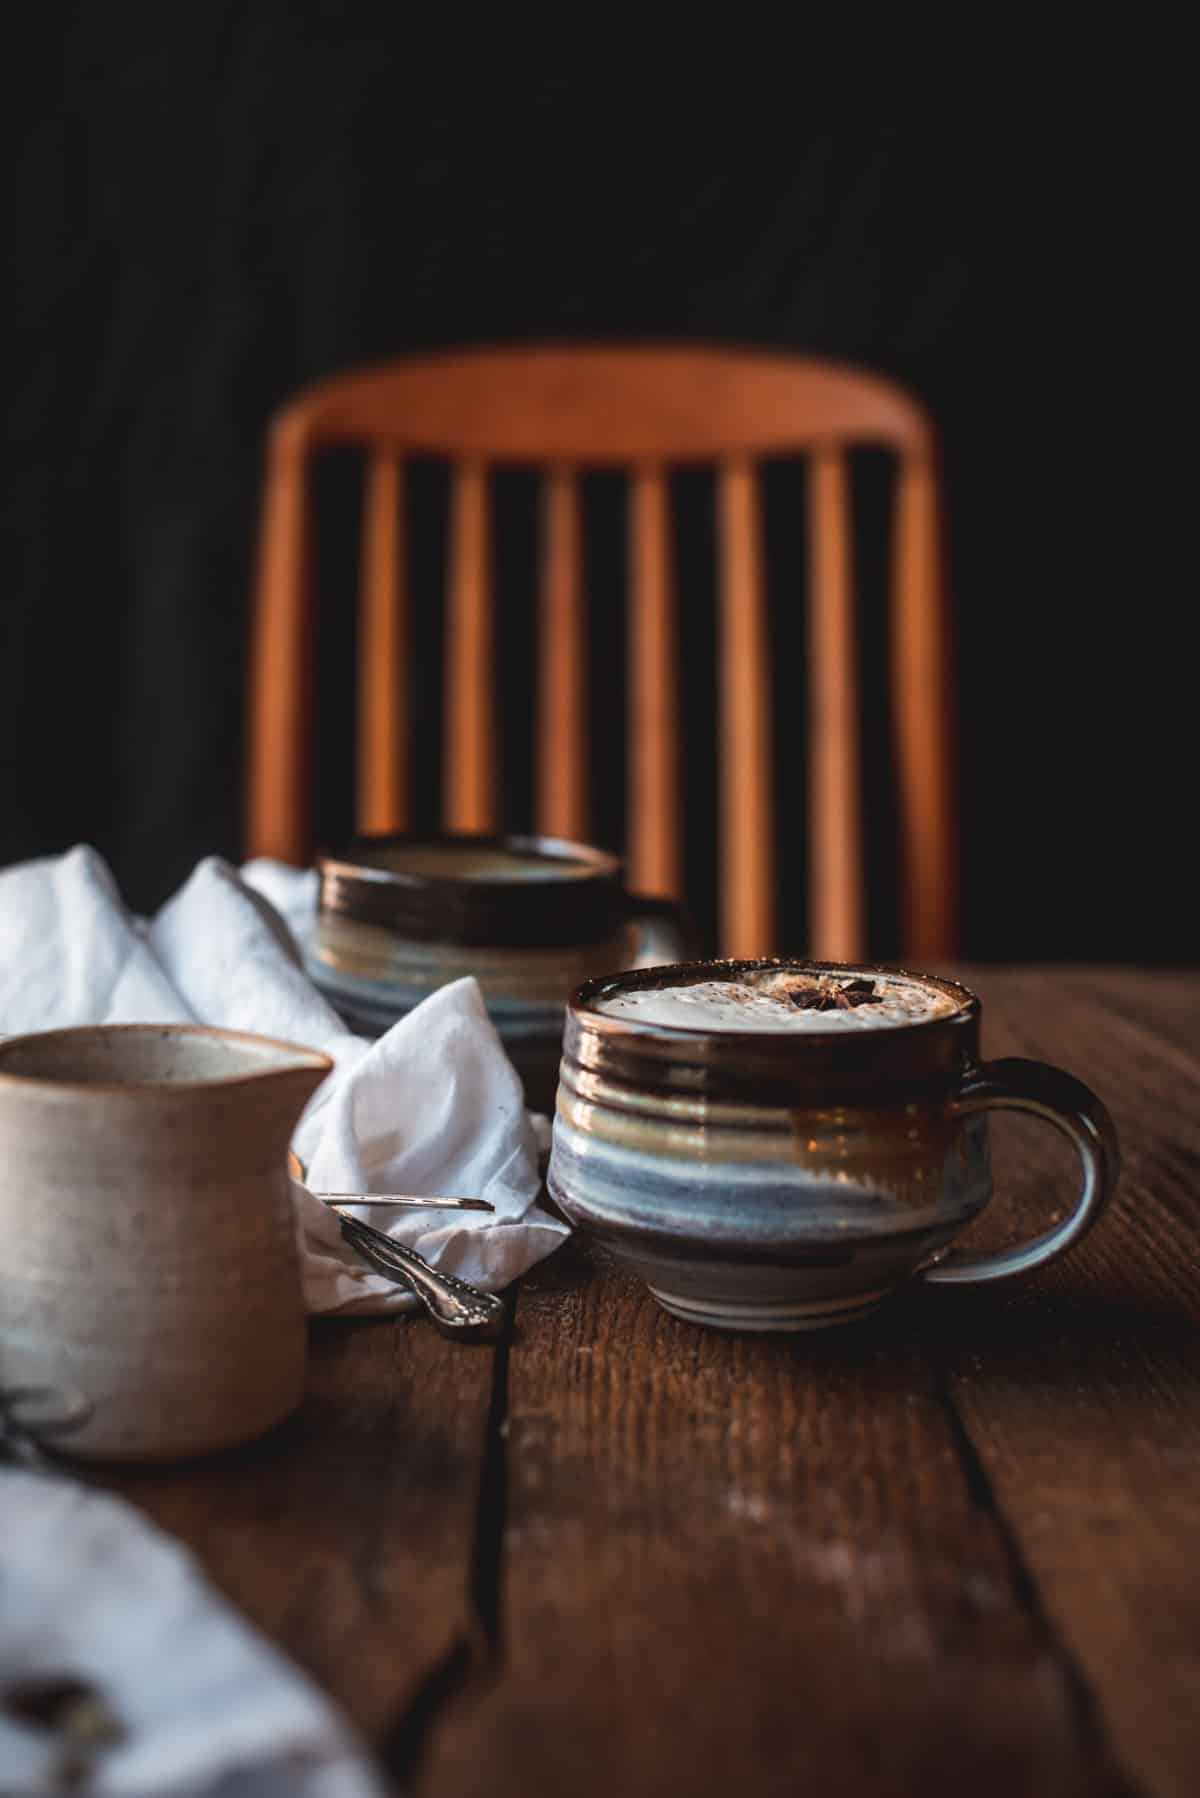 Close up image of the side of a mug filled with dirty chai latte.  The milk on top is very foamy and sprinkled with cinnamon and an anise seed pod.  Next to the mug is a linen napkin with spoons on it and a ceramic carafe.